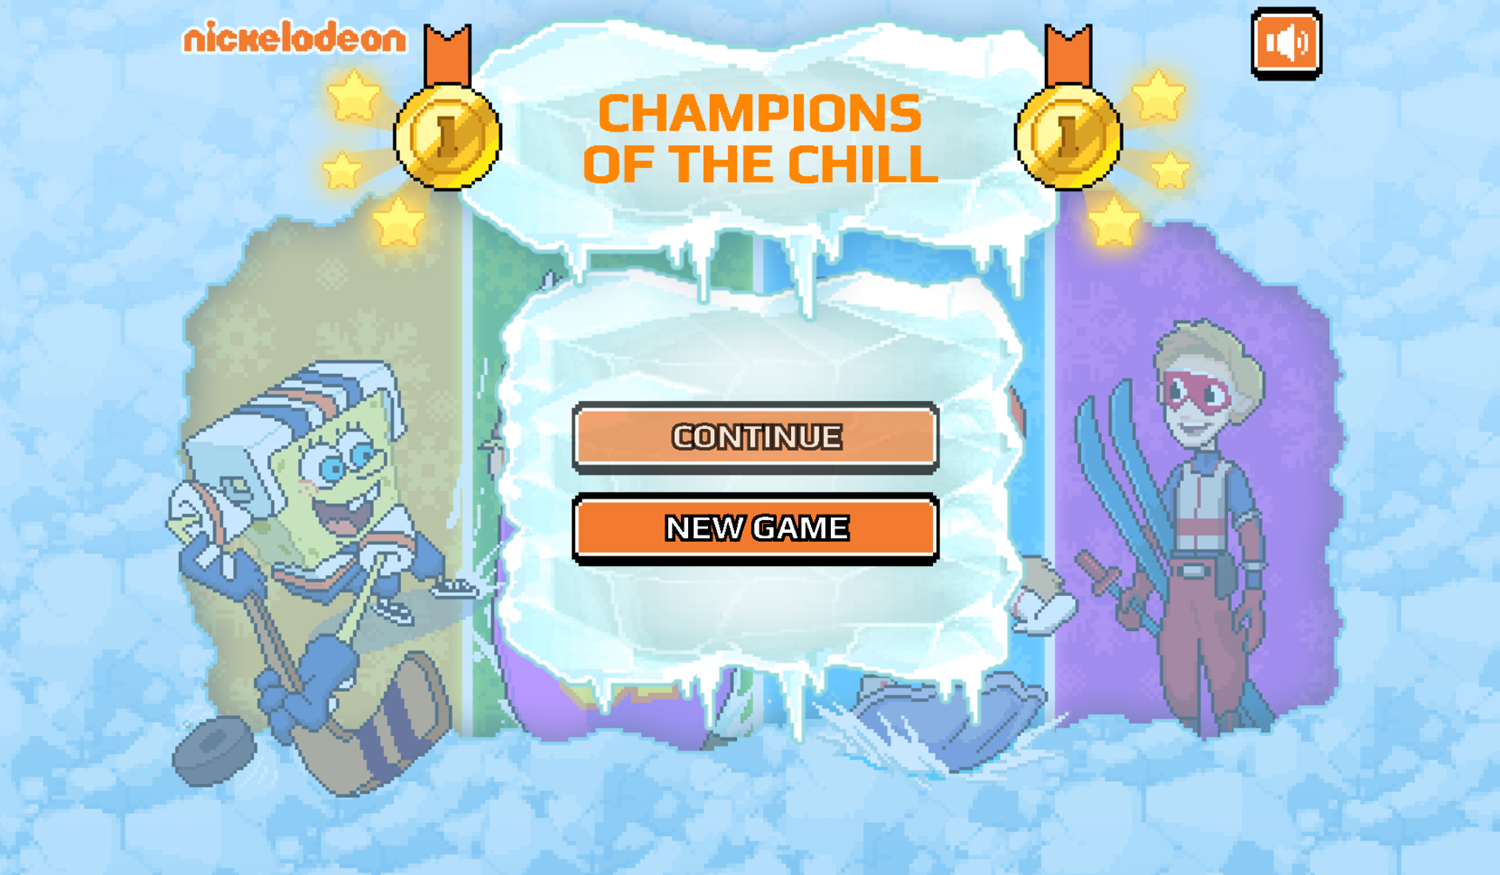 Nick Champions of the Chill 2 New Game Screenshot.